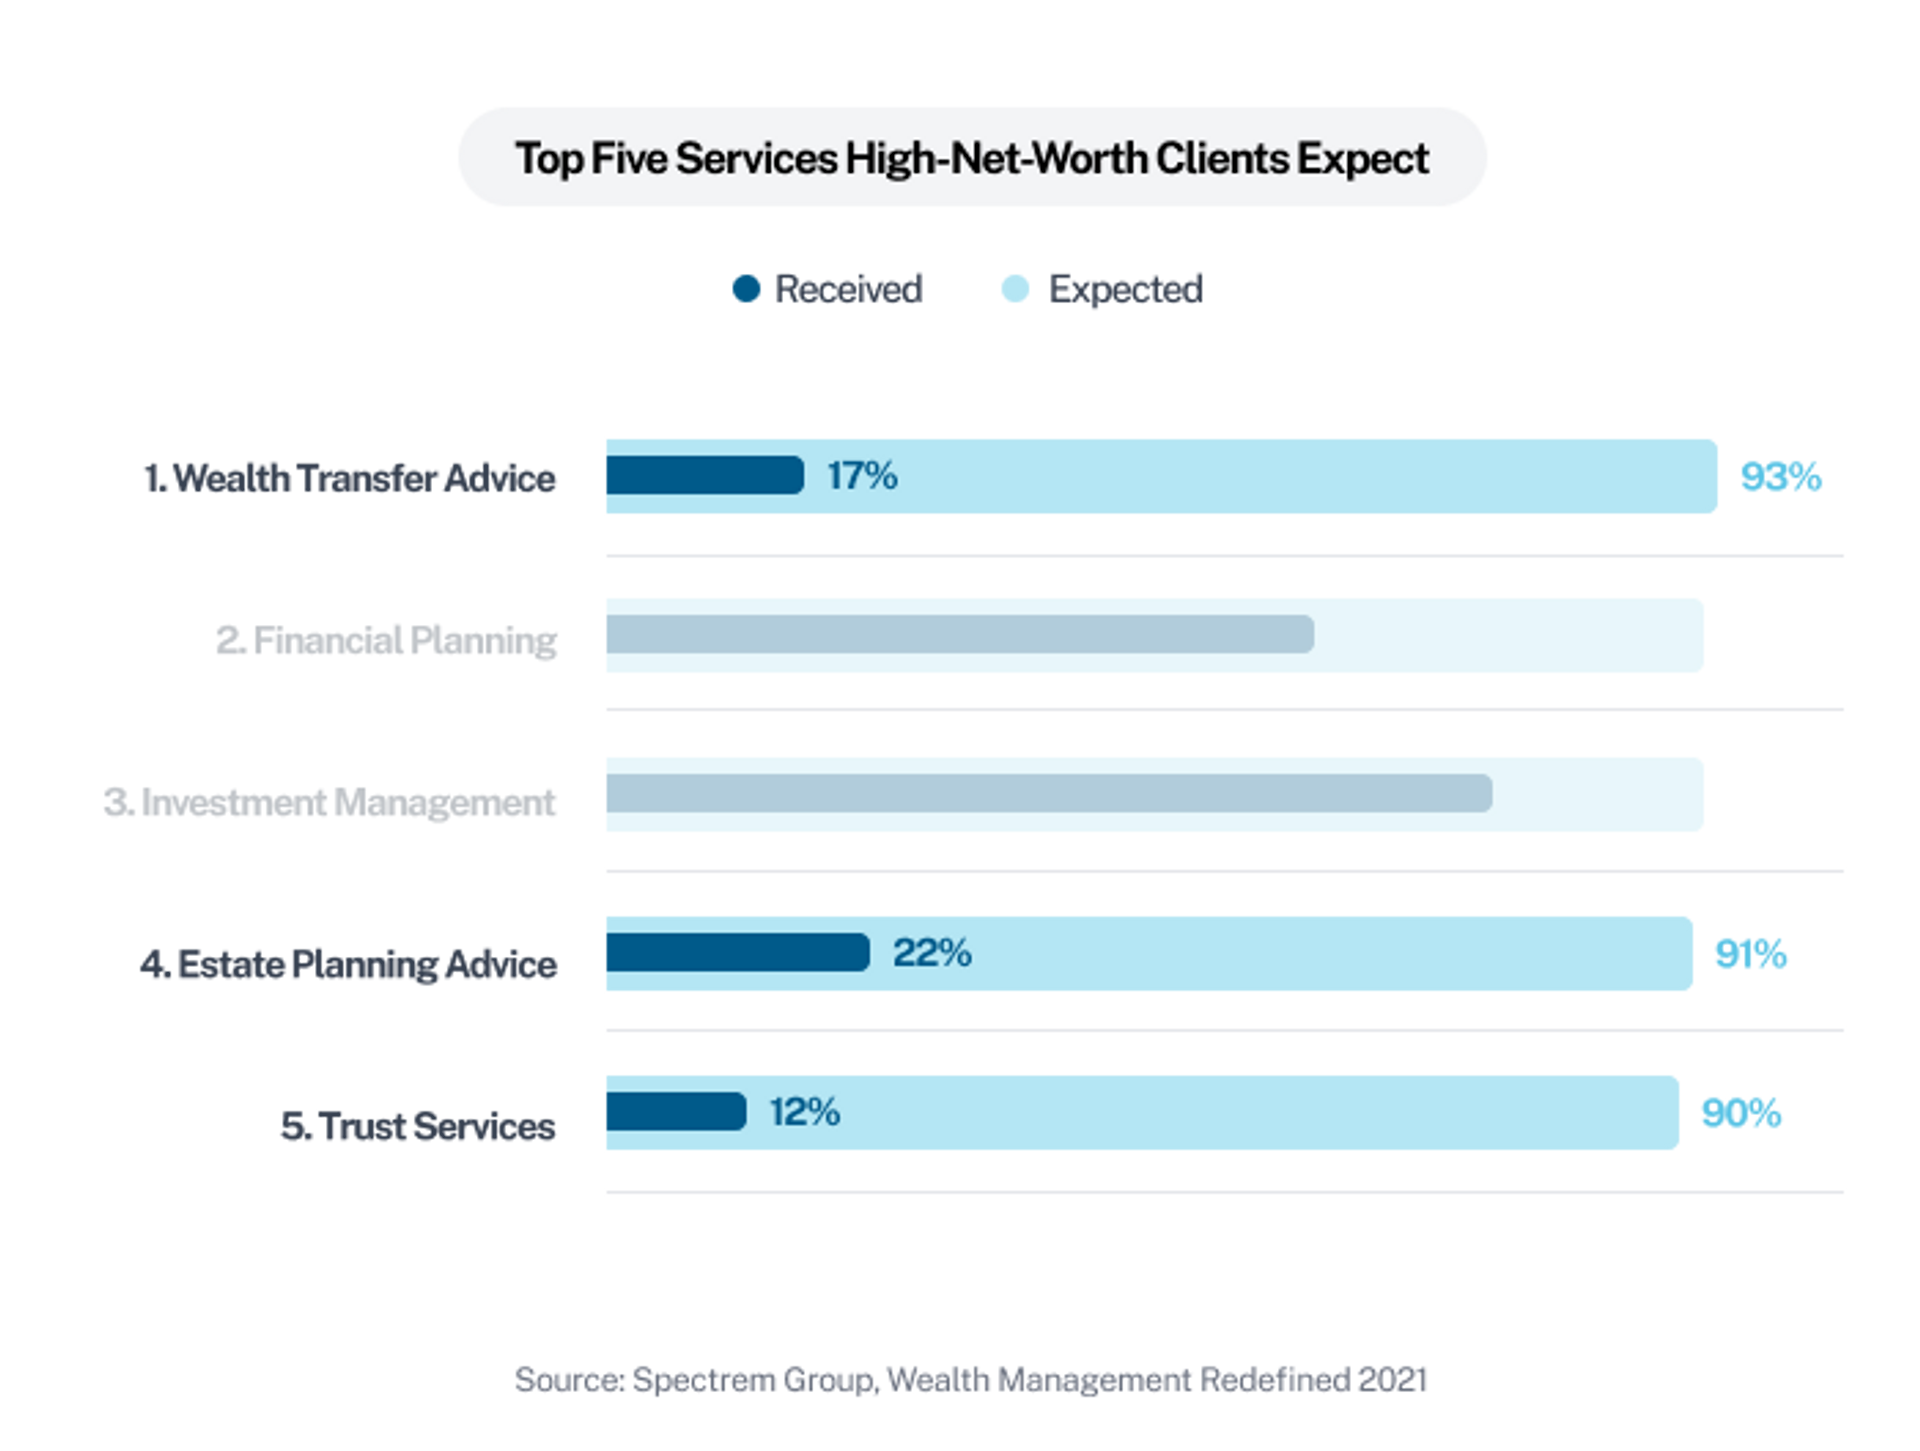 Top Five Services High-Net-Worth Clients Expect